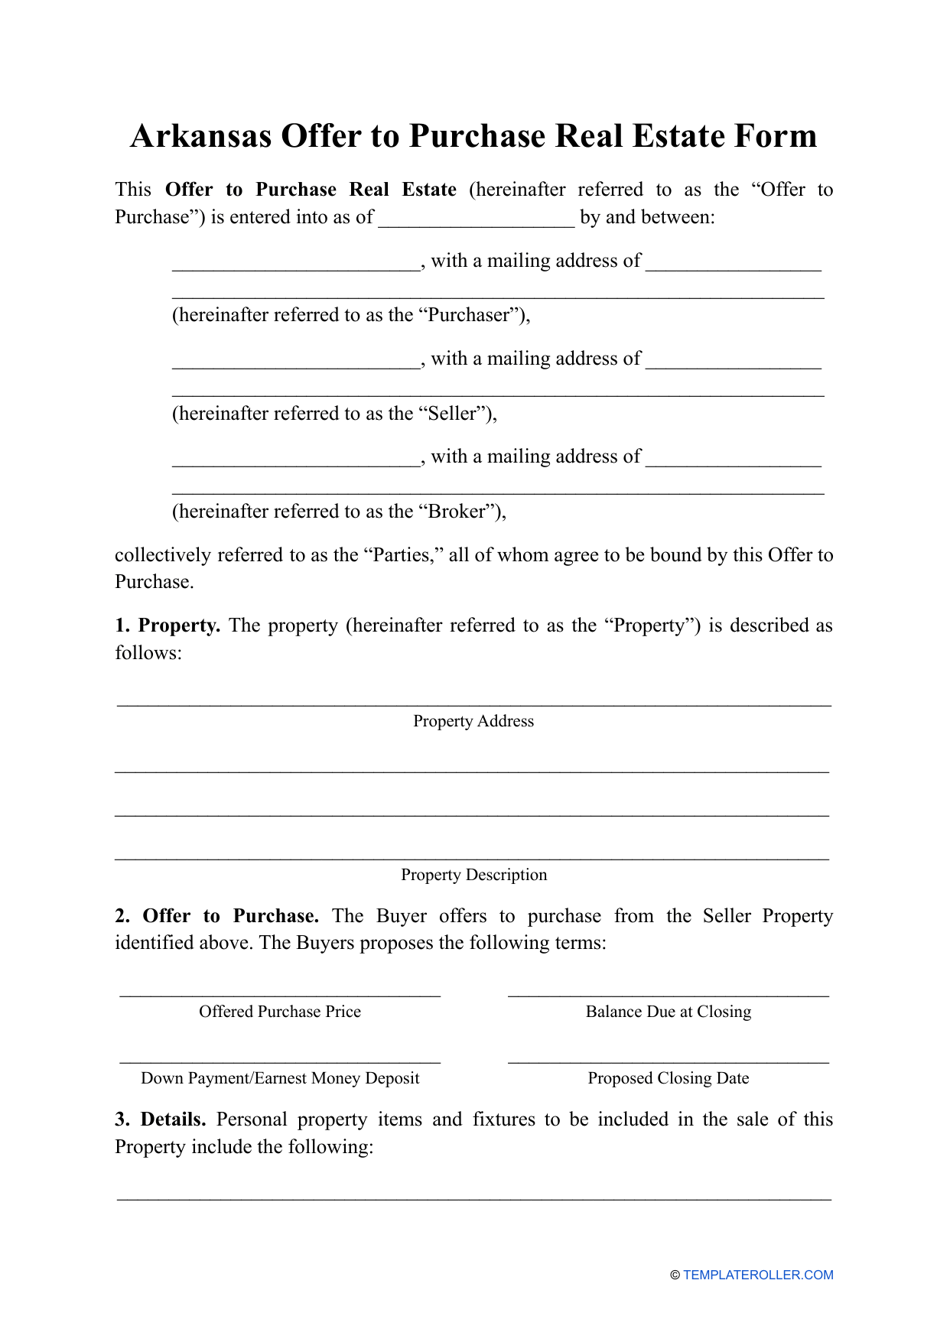 Offer to Purchase Real Estate Form - Arkansas, Page 1